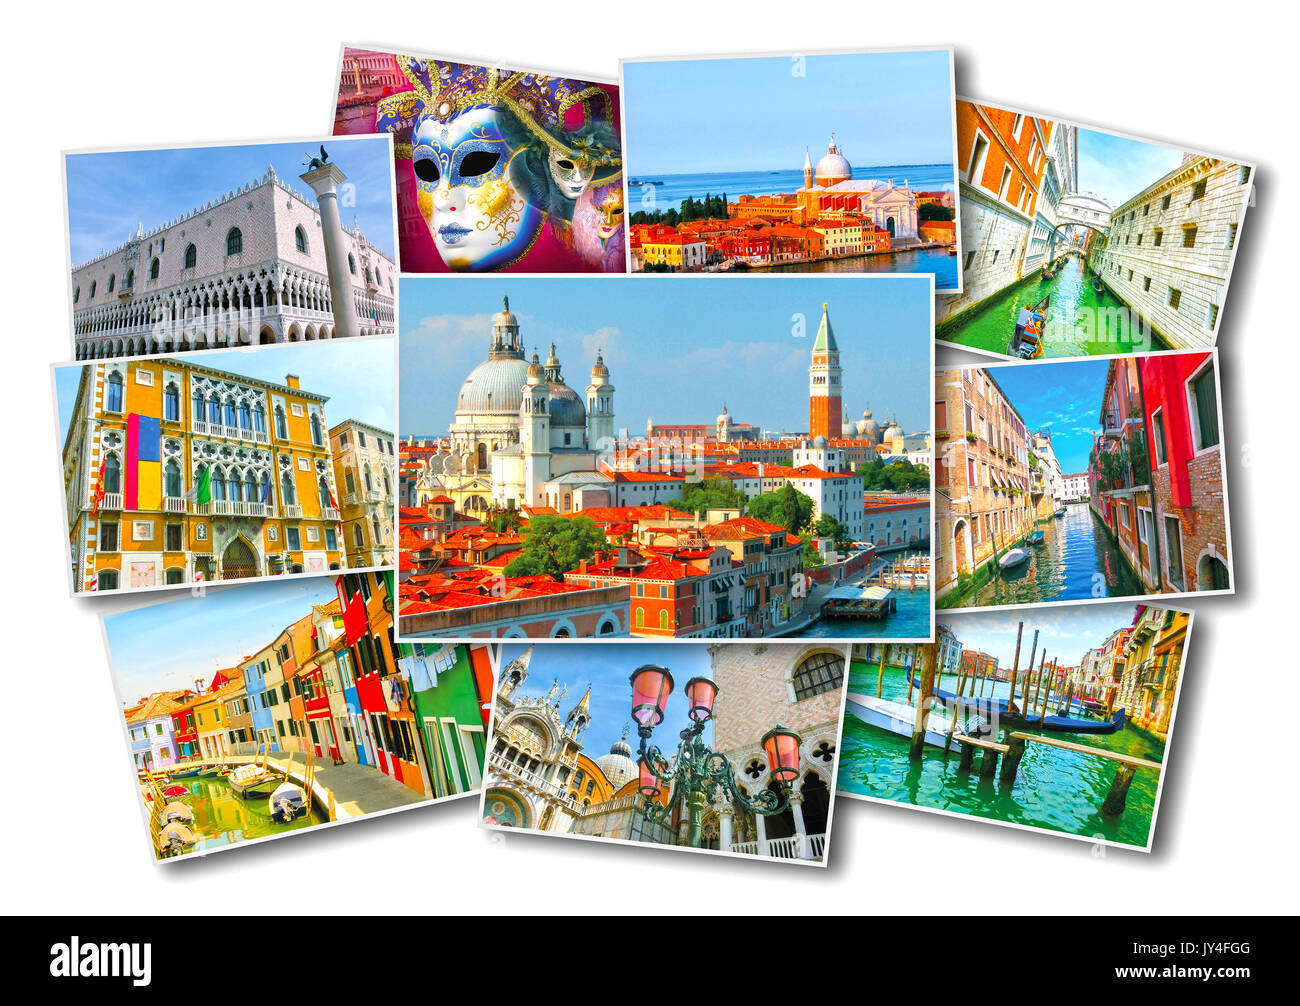 Collage of images from Venice Stock Photo